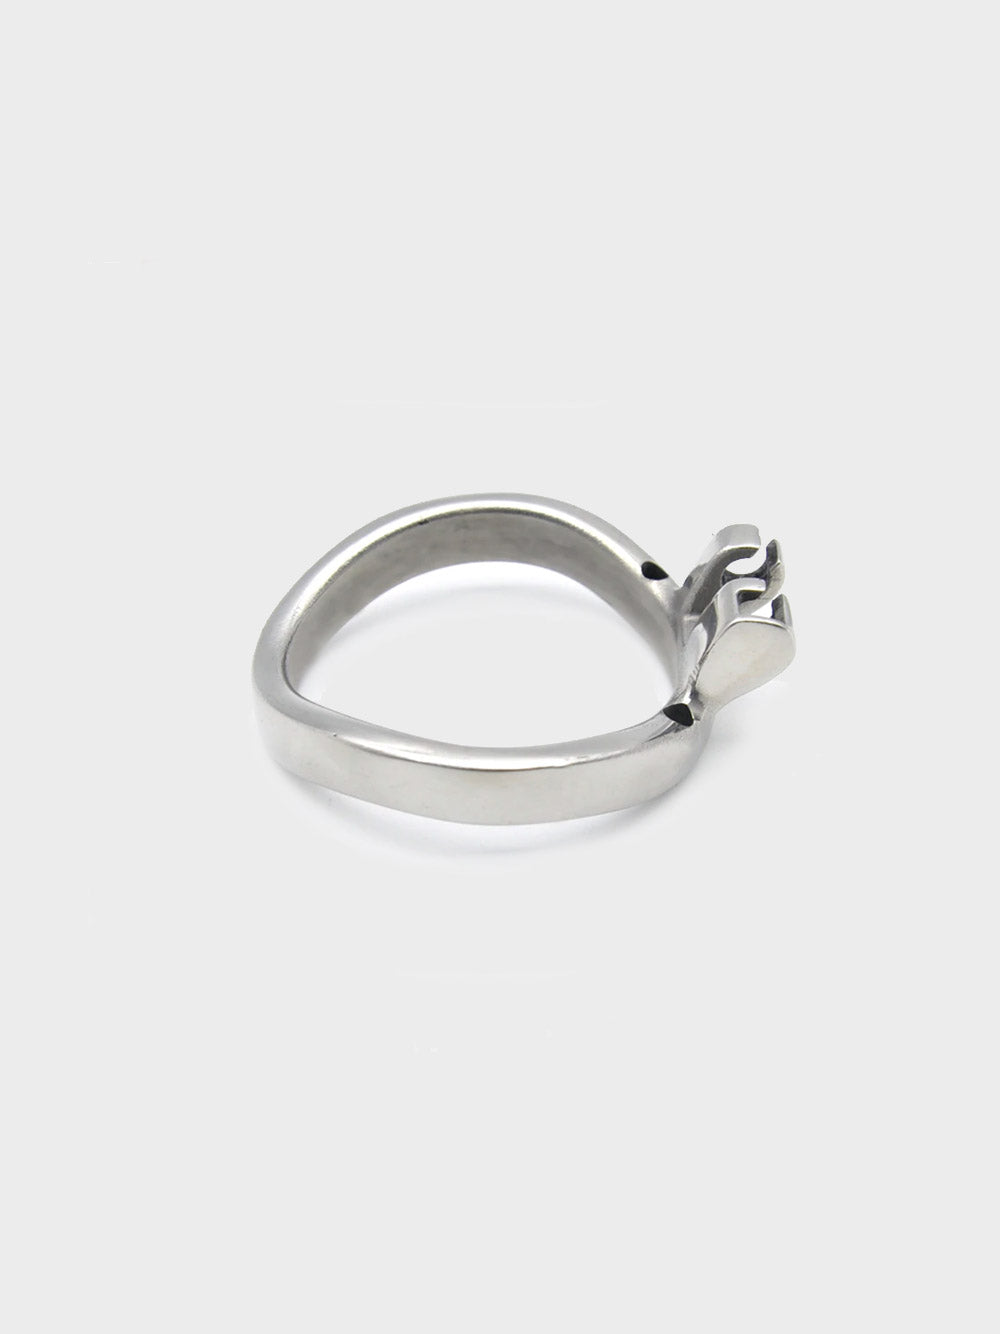 A steel ring for the mens chastity cage